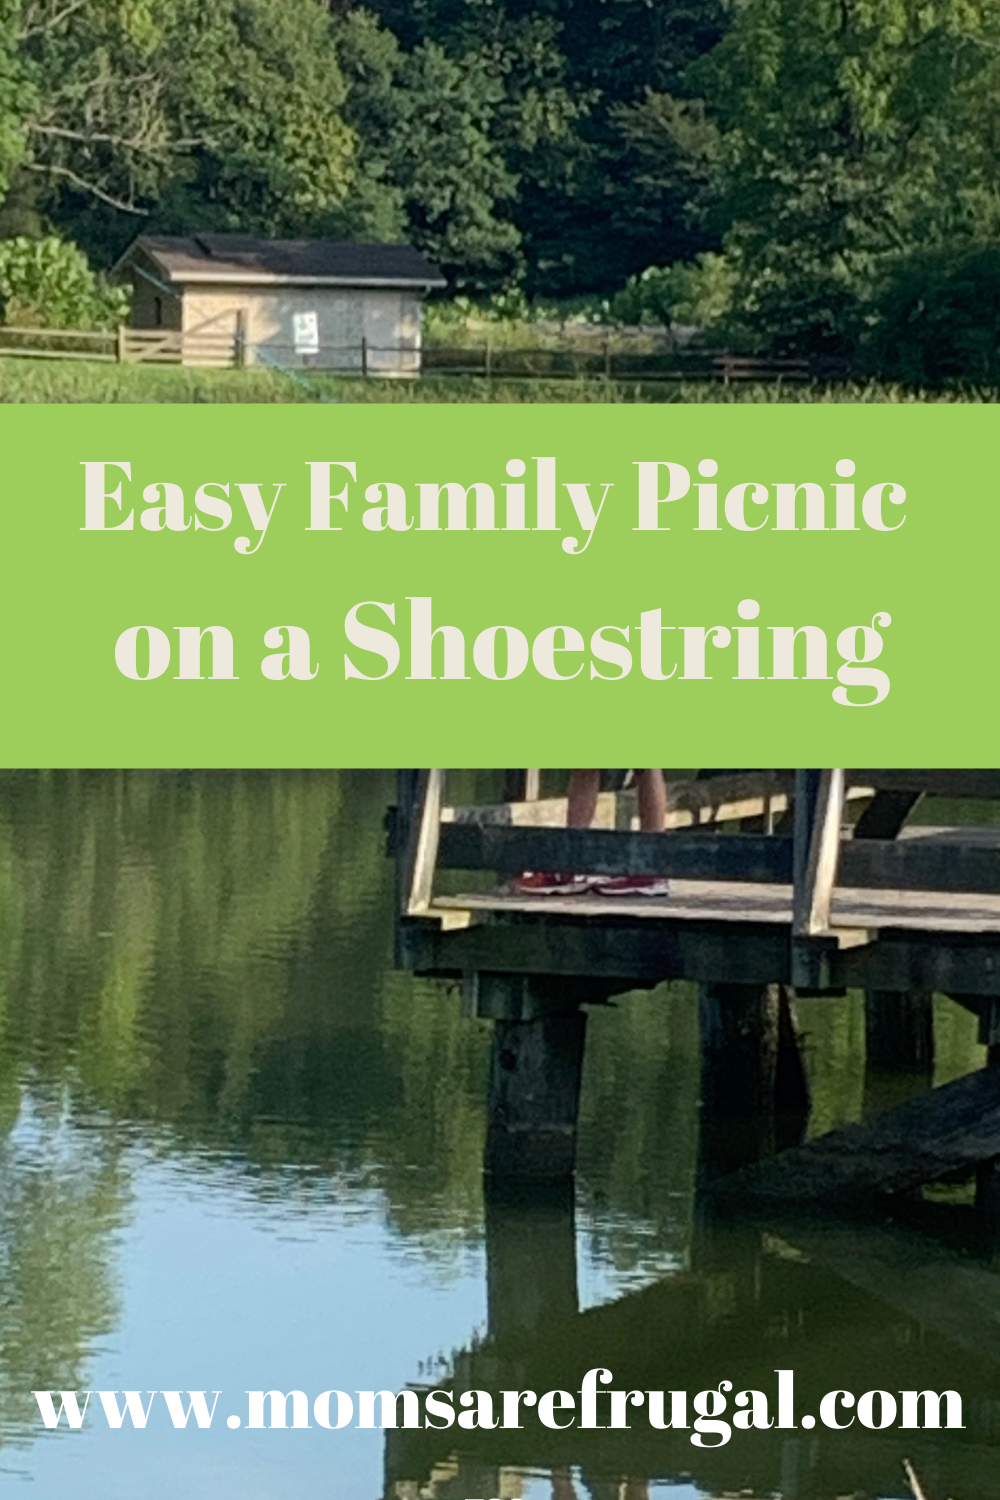 Easy Family Picnic on a Shoestring